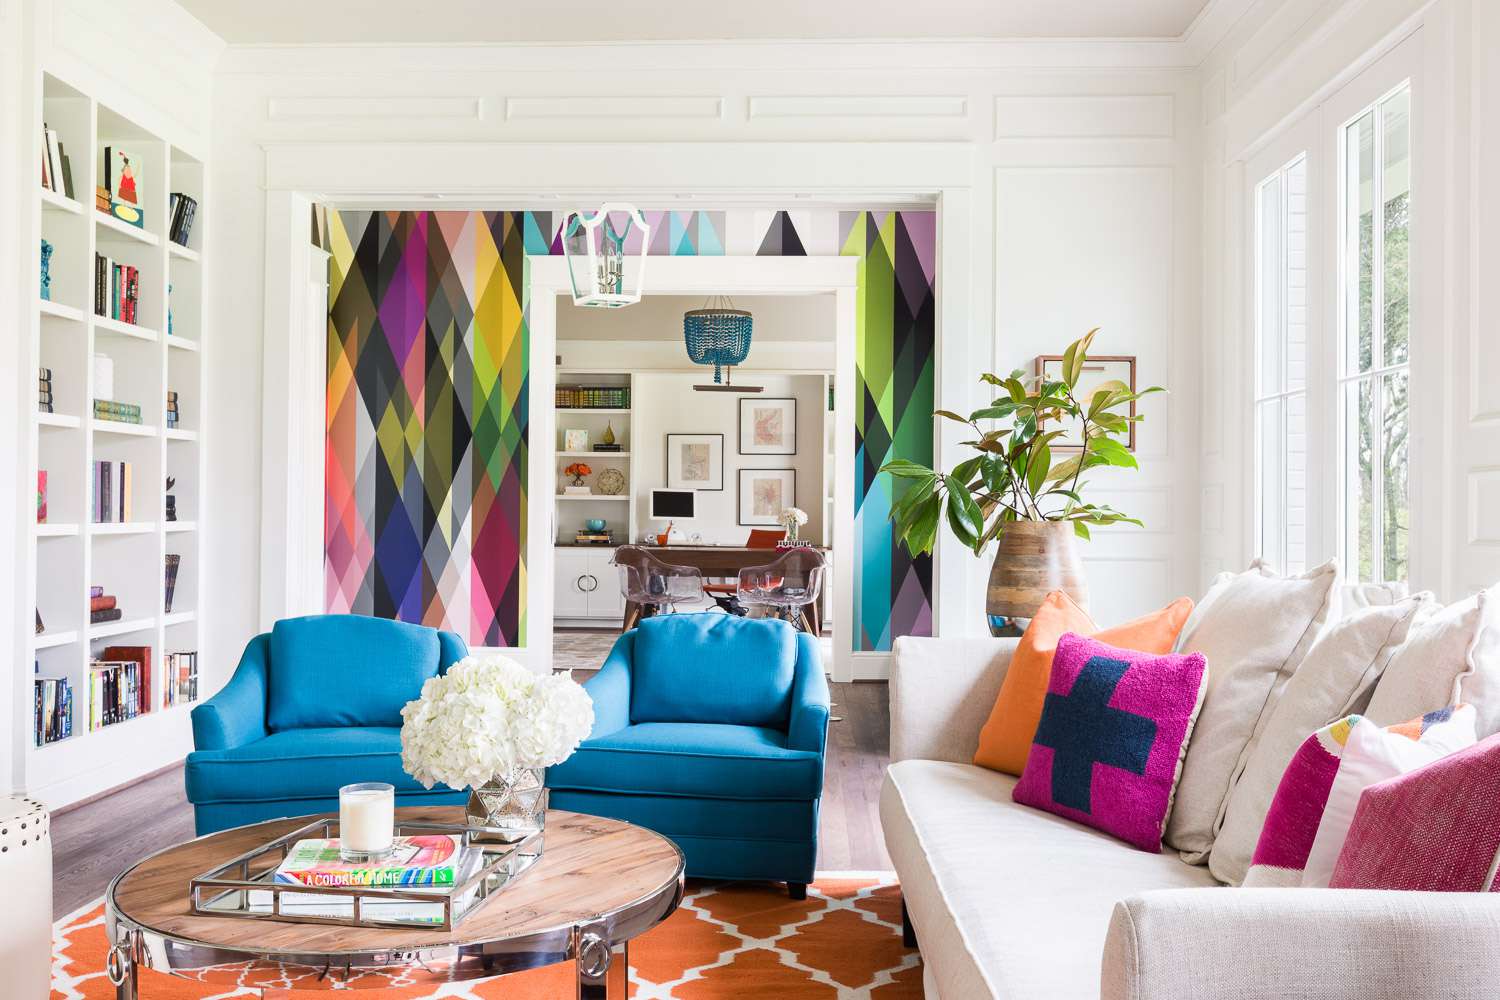 4 Hottest Living Room Colors - Check the Latest Trends for 2022